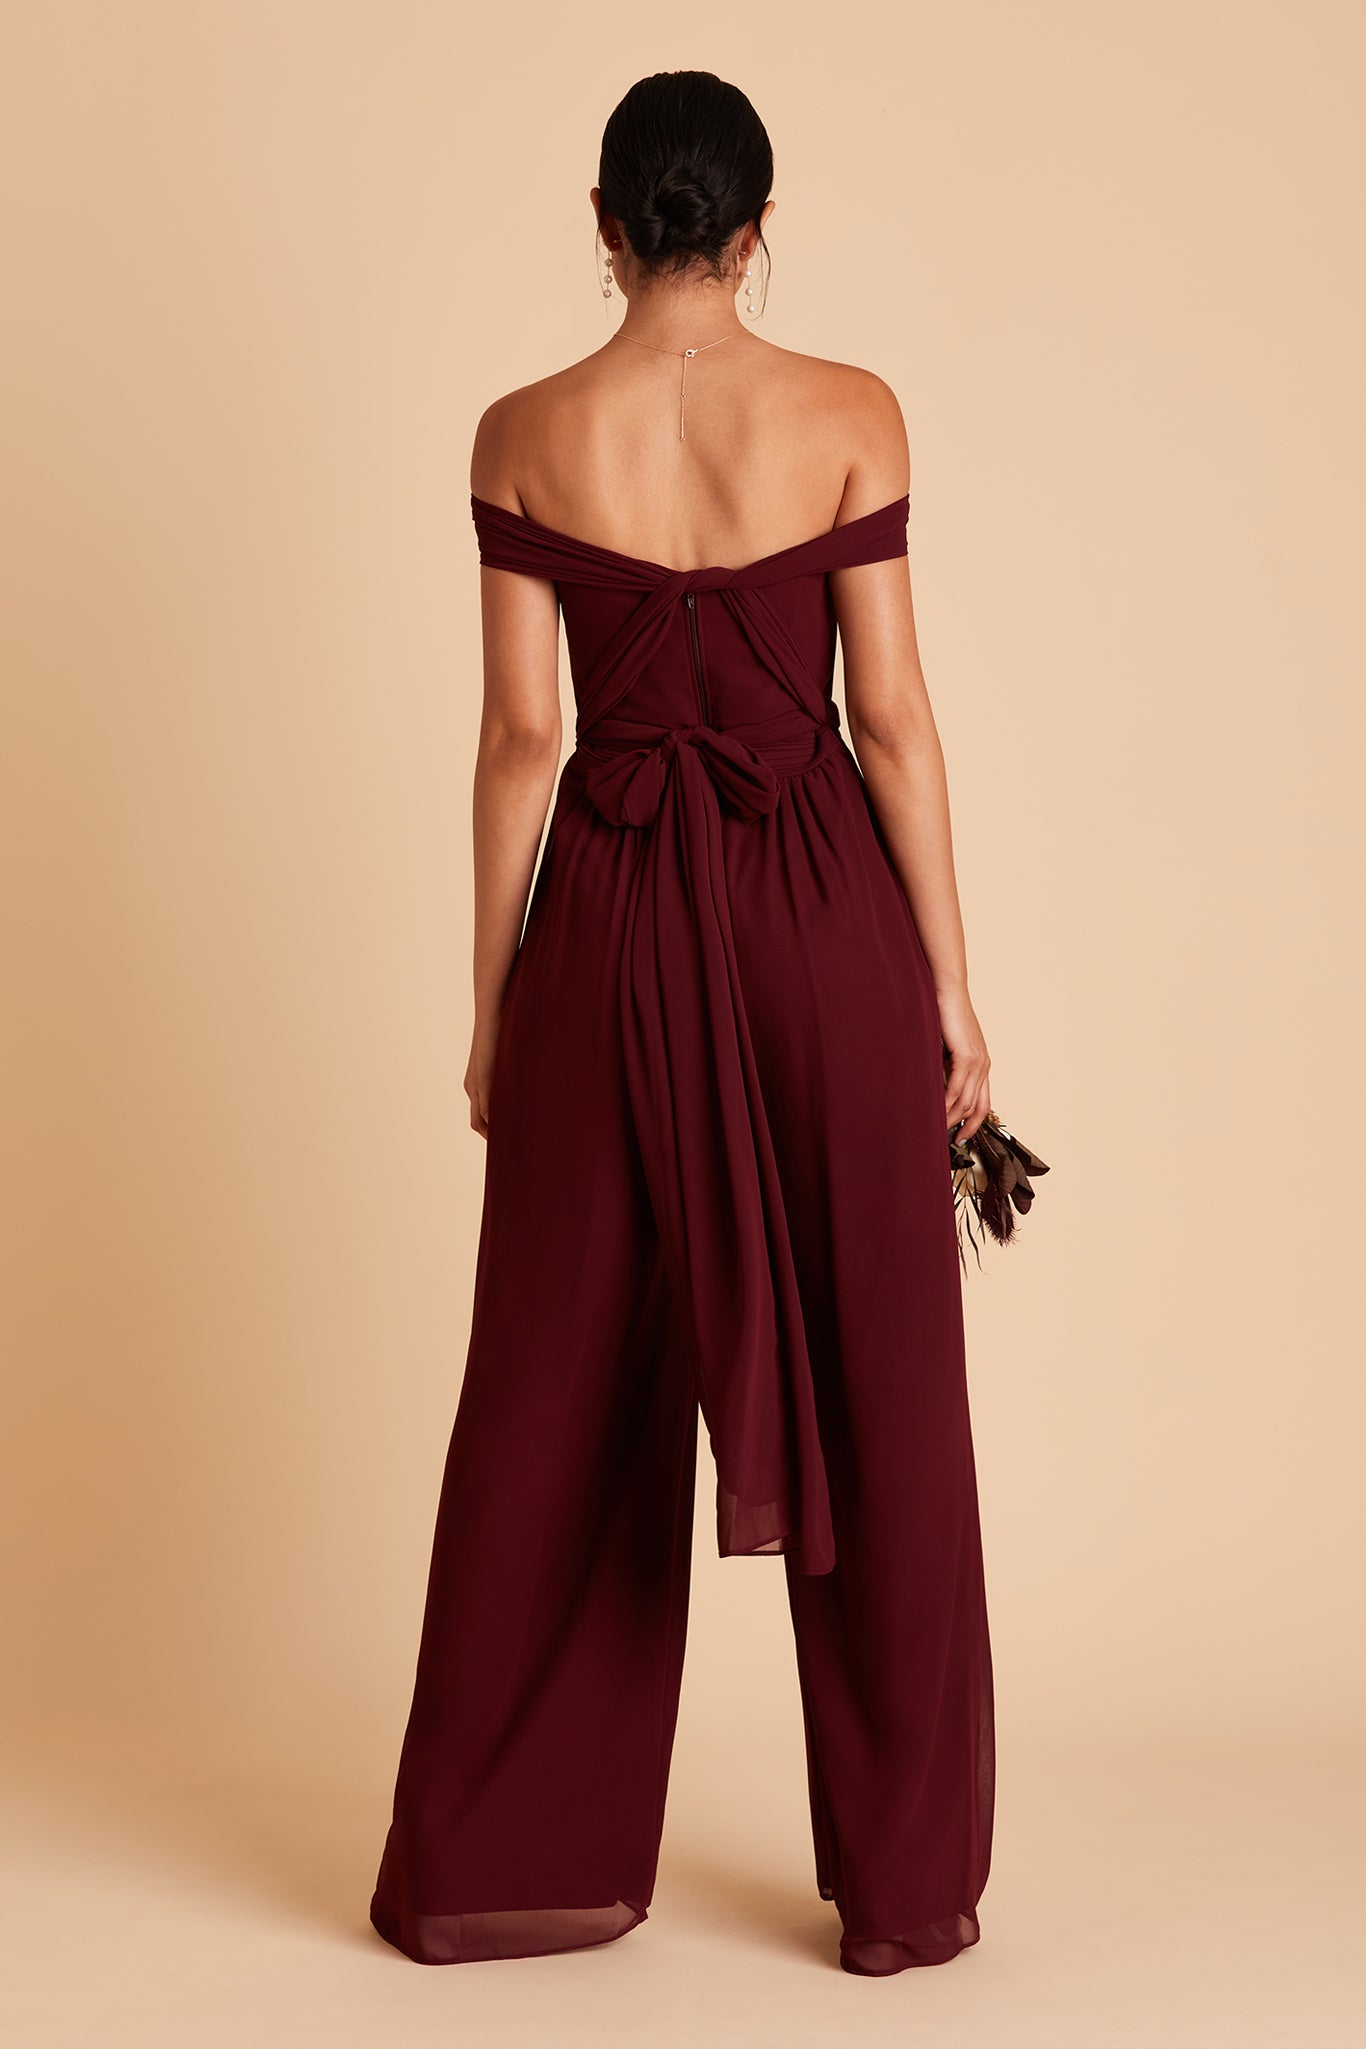 Gigi convertible jumpsuit in cabernet chiffon by Birdy Grey, back view